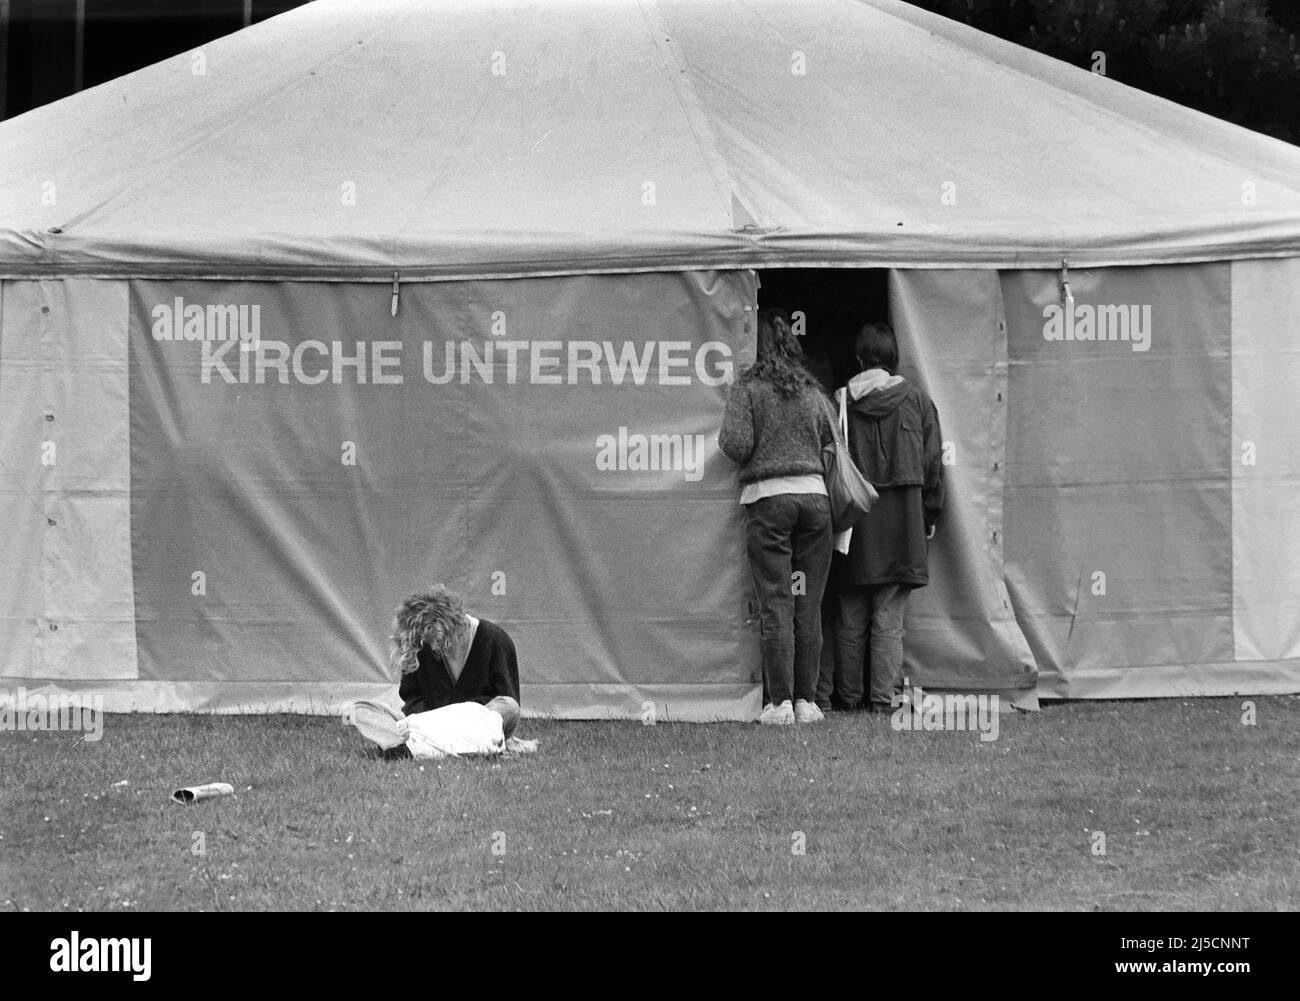 'Dortmund, DEU, 05.06.1991 - Tent of the 24th German Protestant Church Congress in Dortmund. The Kirchentag took place from June 5 to 9, 1991 in the Ruhr area under the motto ''God's Spirit frees us to live''. It was the first church congress after the reunification. [automated translation]' Stock Photo